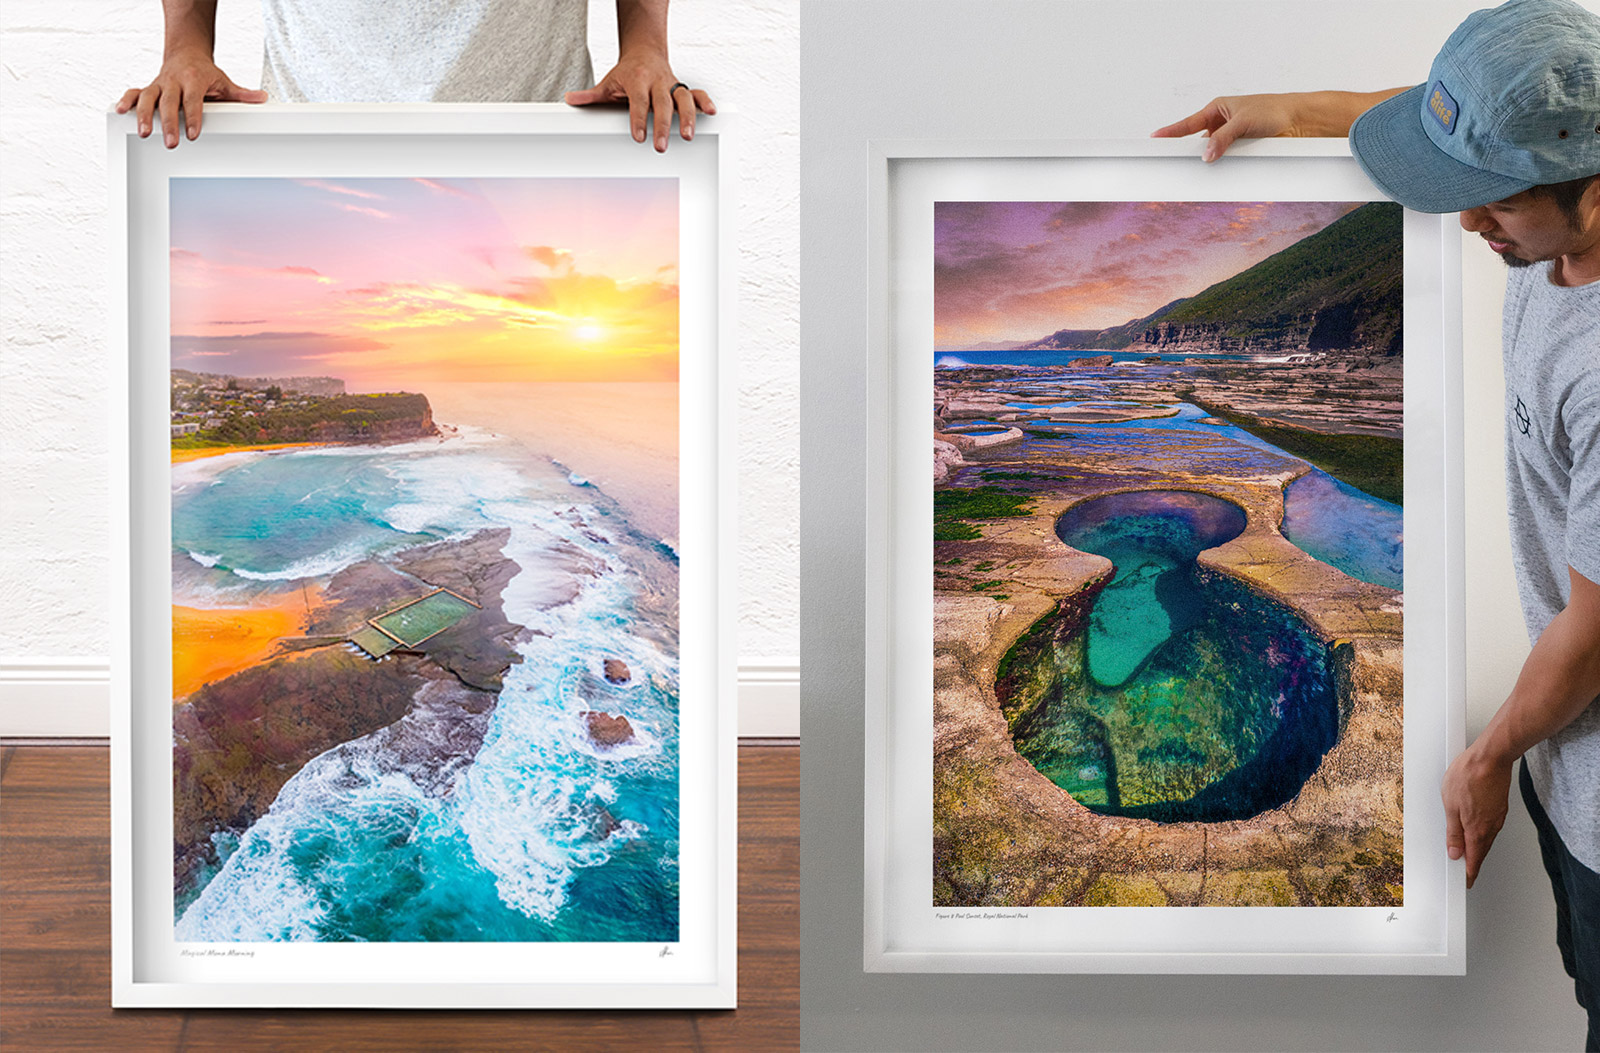 Travel Photography by Allan Chan, Gotthewanderingeye. Holding framed print of sunrise at Mona Vale Beach Rockpool and sunset at Figure 8 Pools.